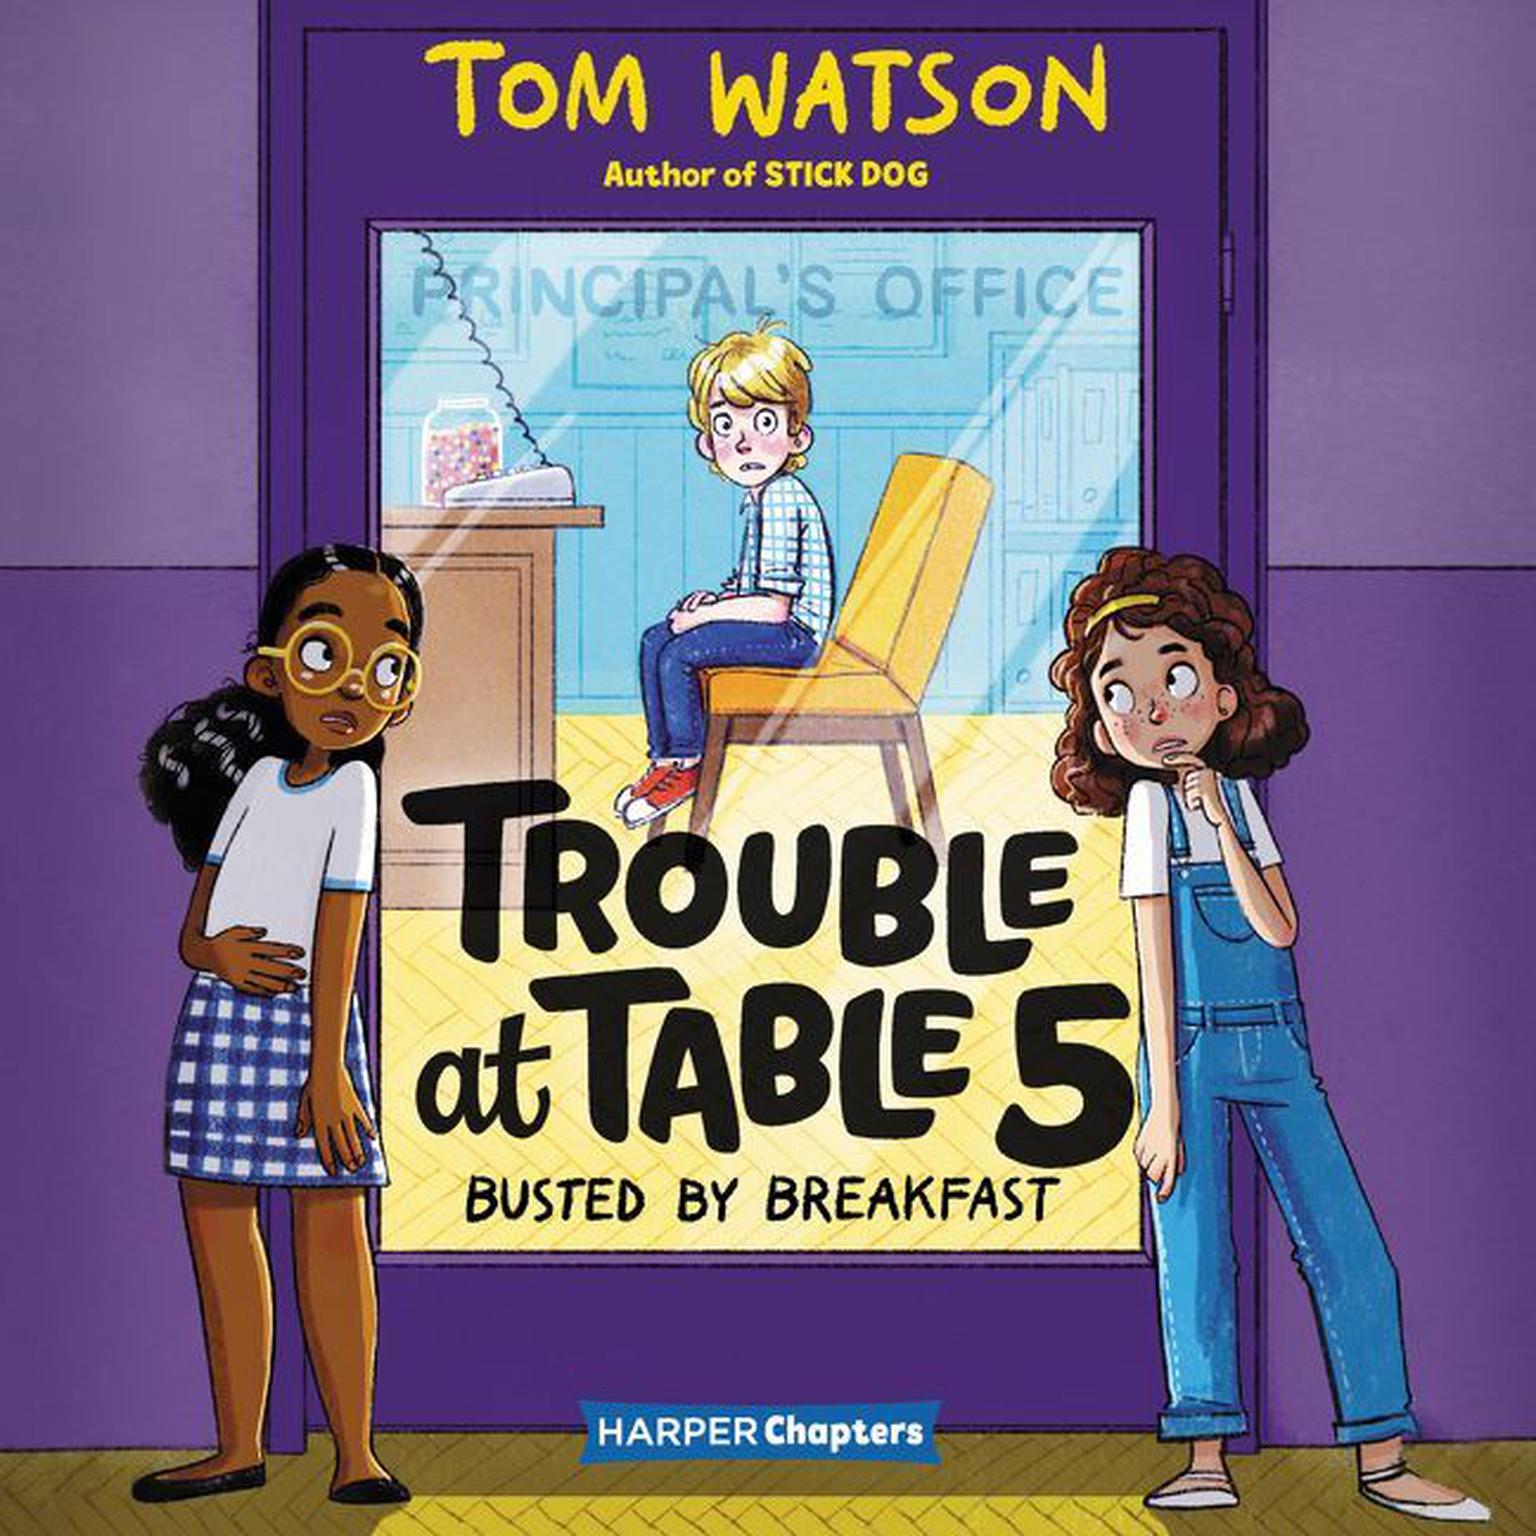 Trouble at Table 5 #2: Busted by Breakfast Audiobook, by Tom Watson